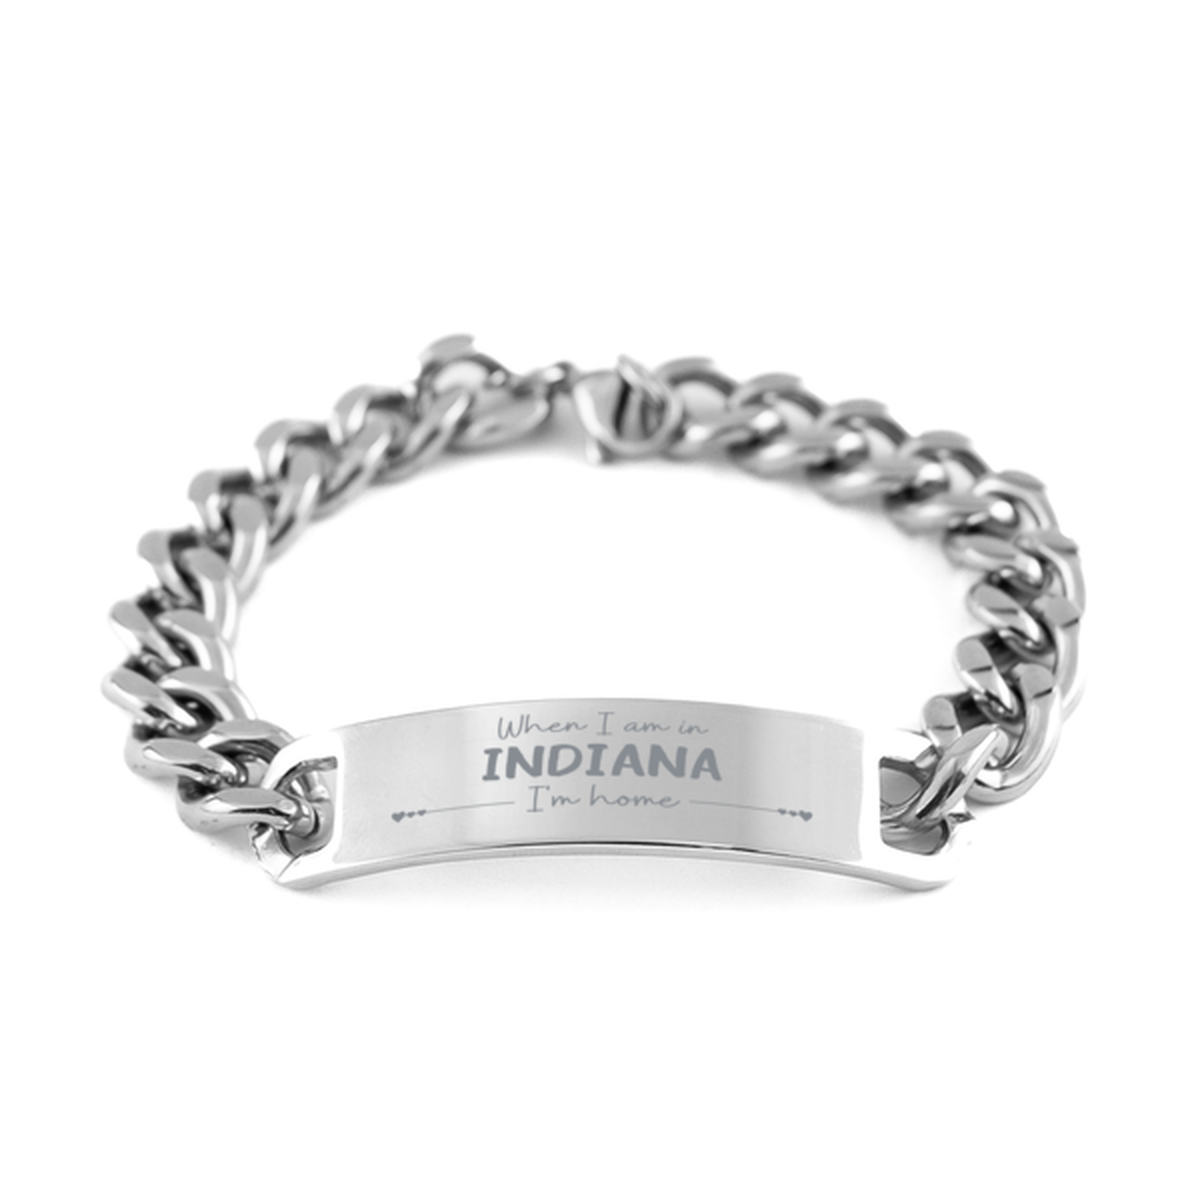 When I am in Indiana I'm home Cuban Chain Stainless Steel Bracelet, Cheap Gifts For Indiana, State Indiana Birthday Gifts for Friends Coworker